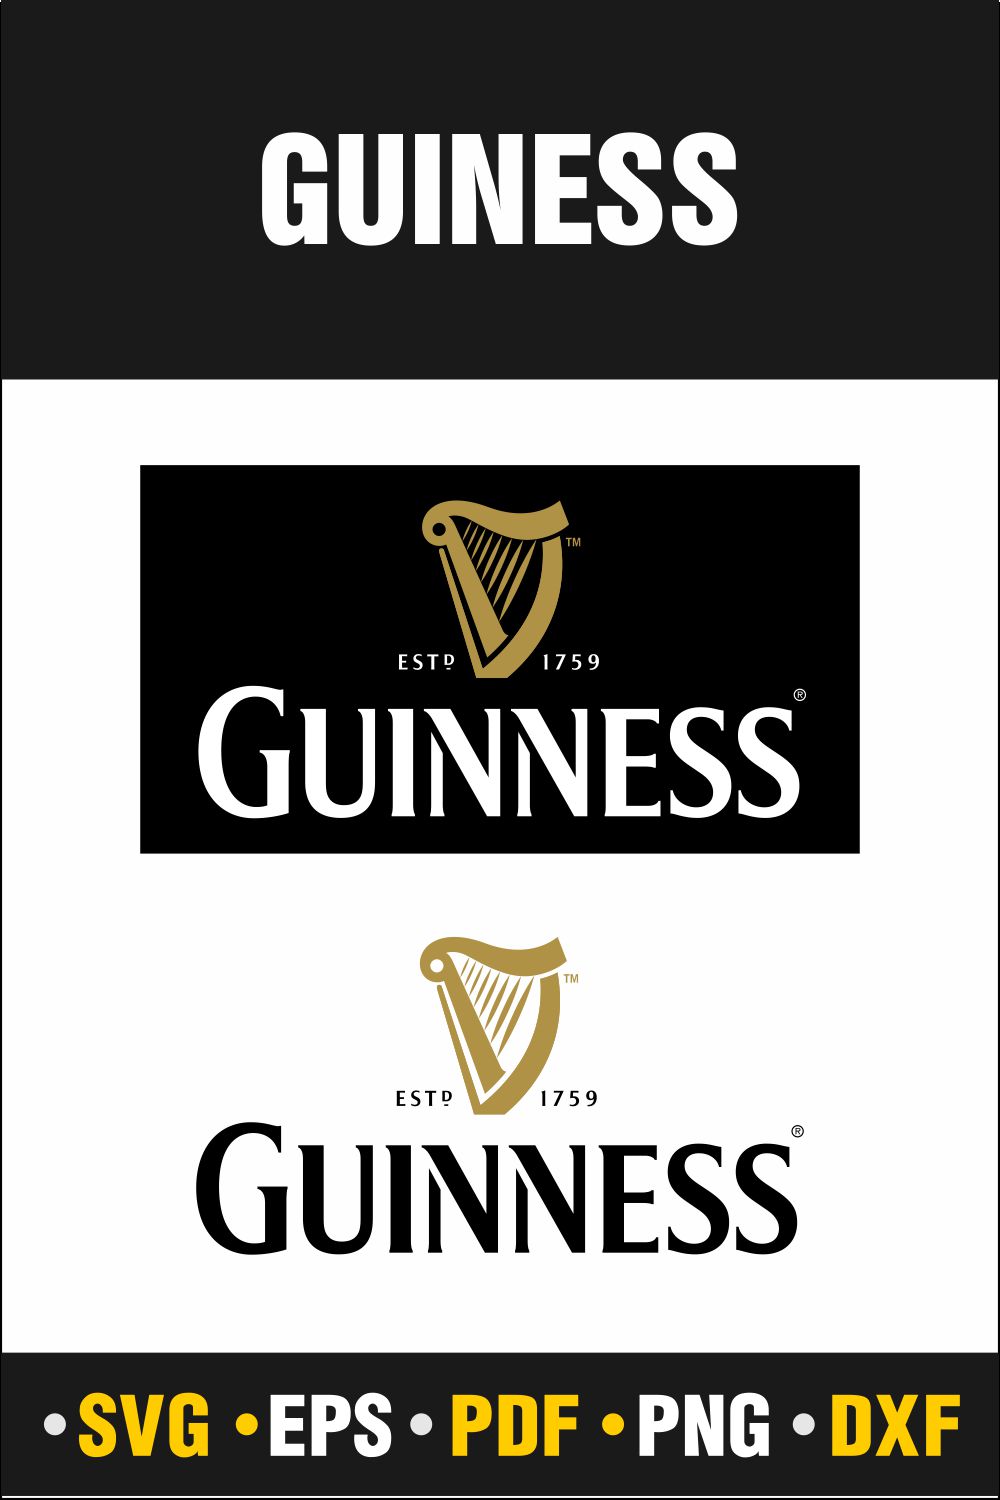 Guiness Svg, Guiness, Guiness Beer Svg, Guiness Png, Beer Png, Guines Svg, Instant Download Vector Cut file Cricut, Silhouette, Pdf Png, Dxf, Decal pinterest preview image.